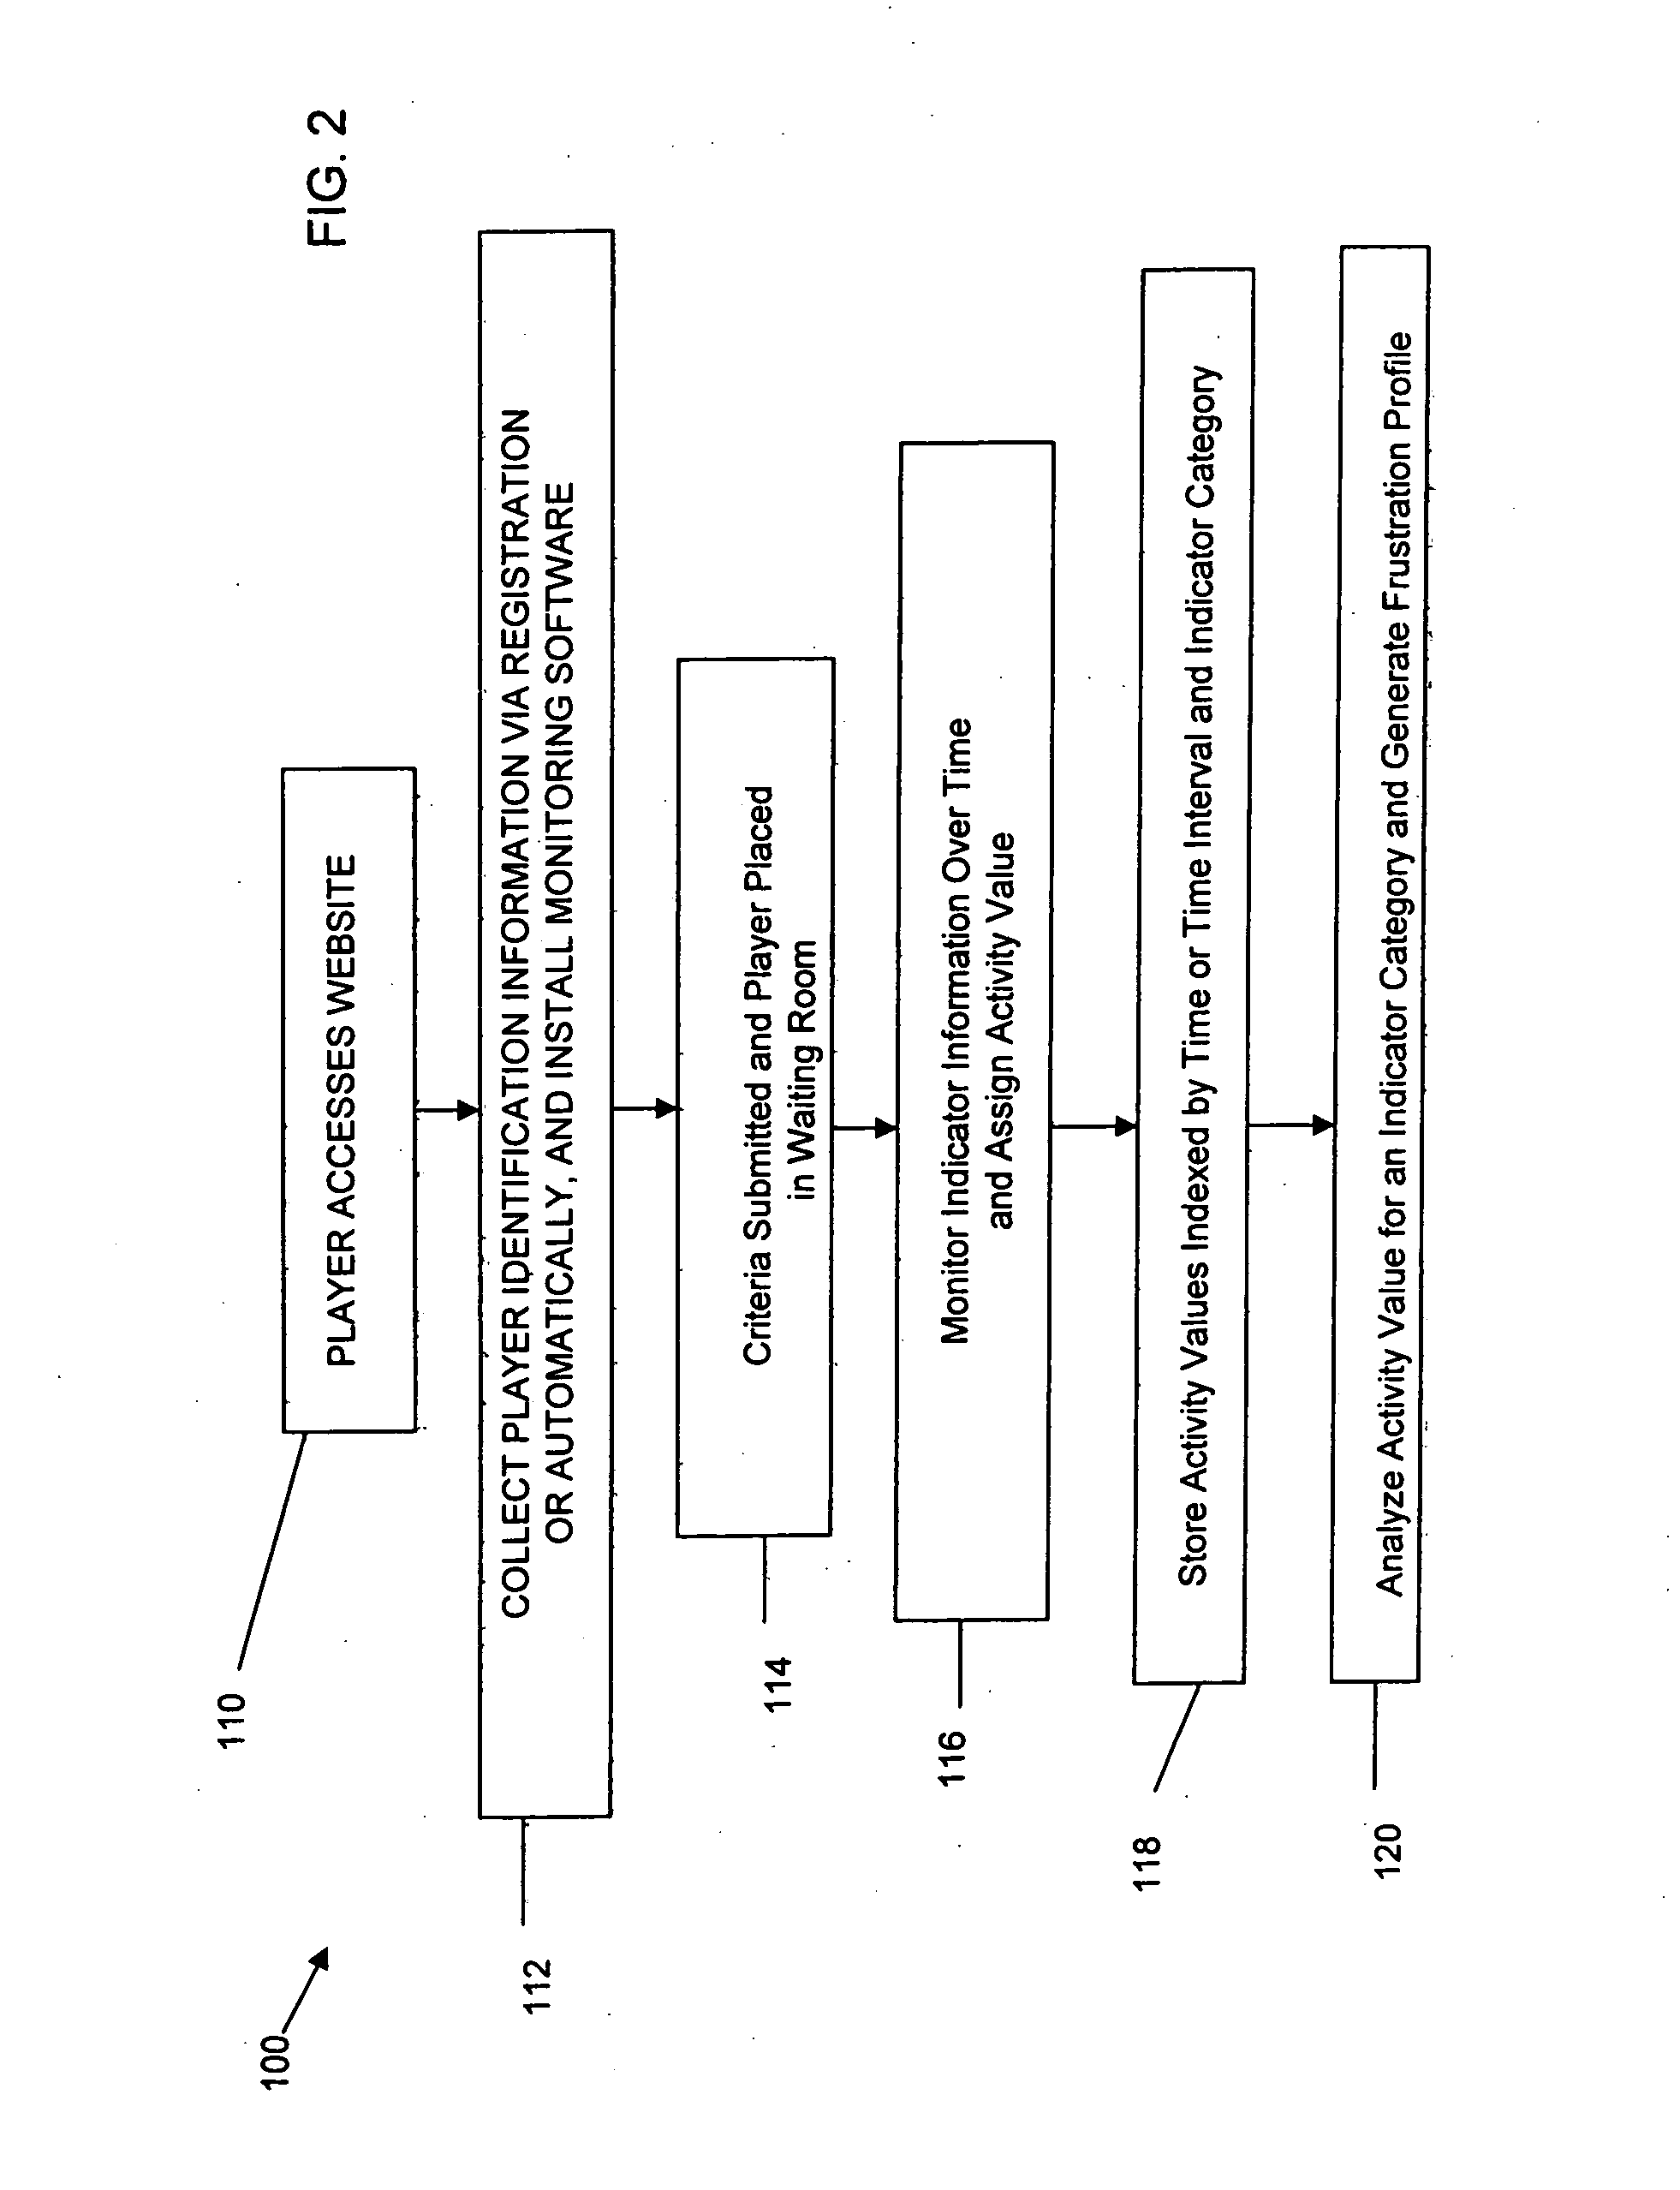 Method and system for determining a frustration profile of a player on an online game and using the frustration profile to enhance the online experience of the player